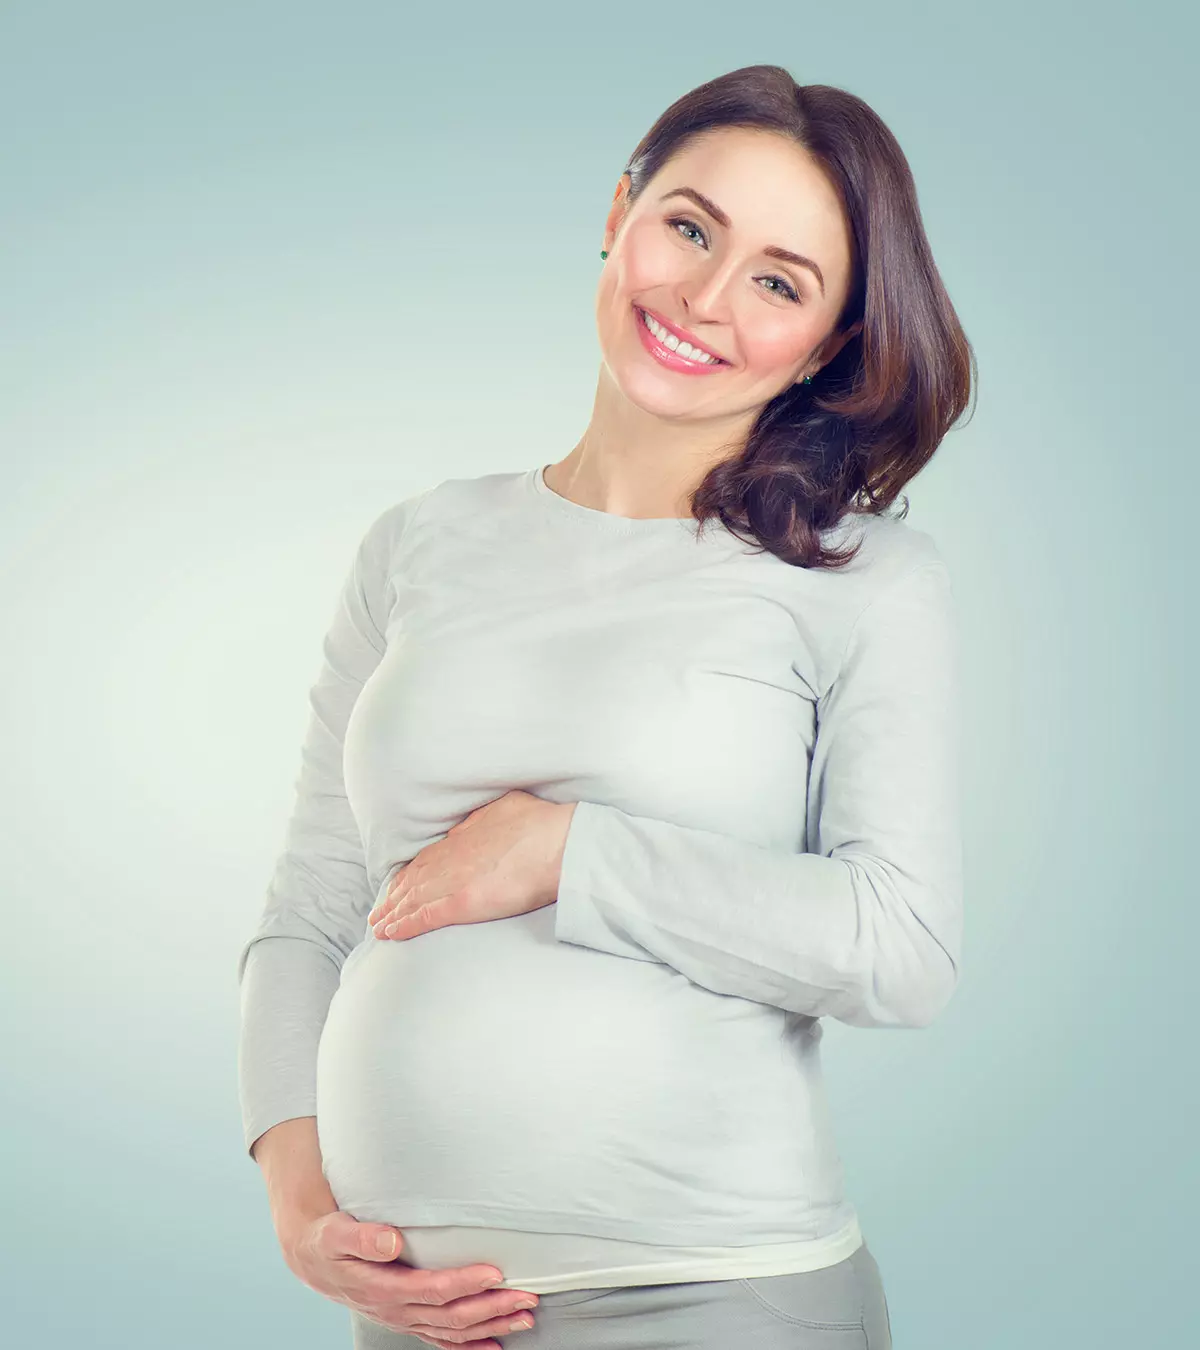 Look And Feel Your Best During Pregnancy